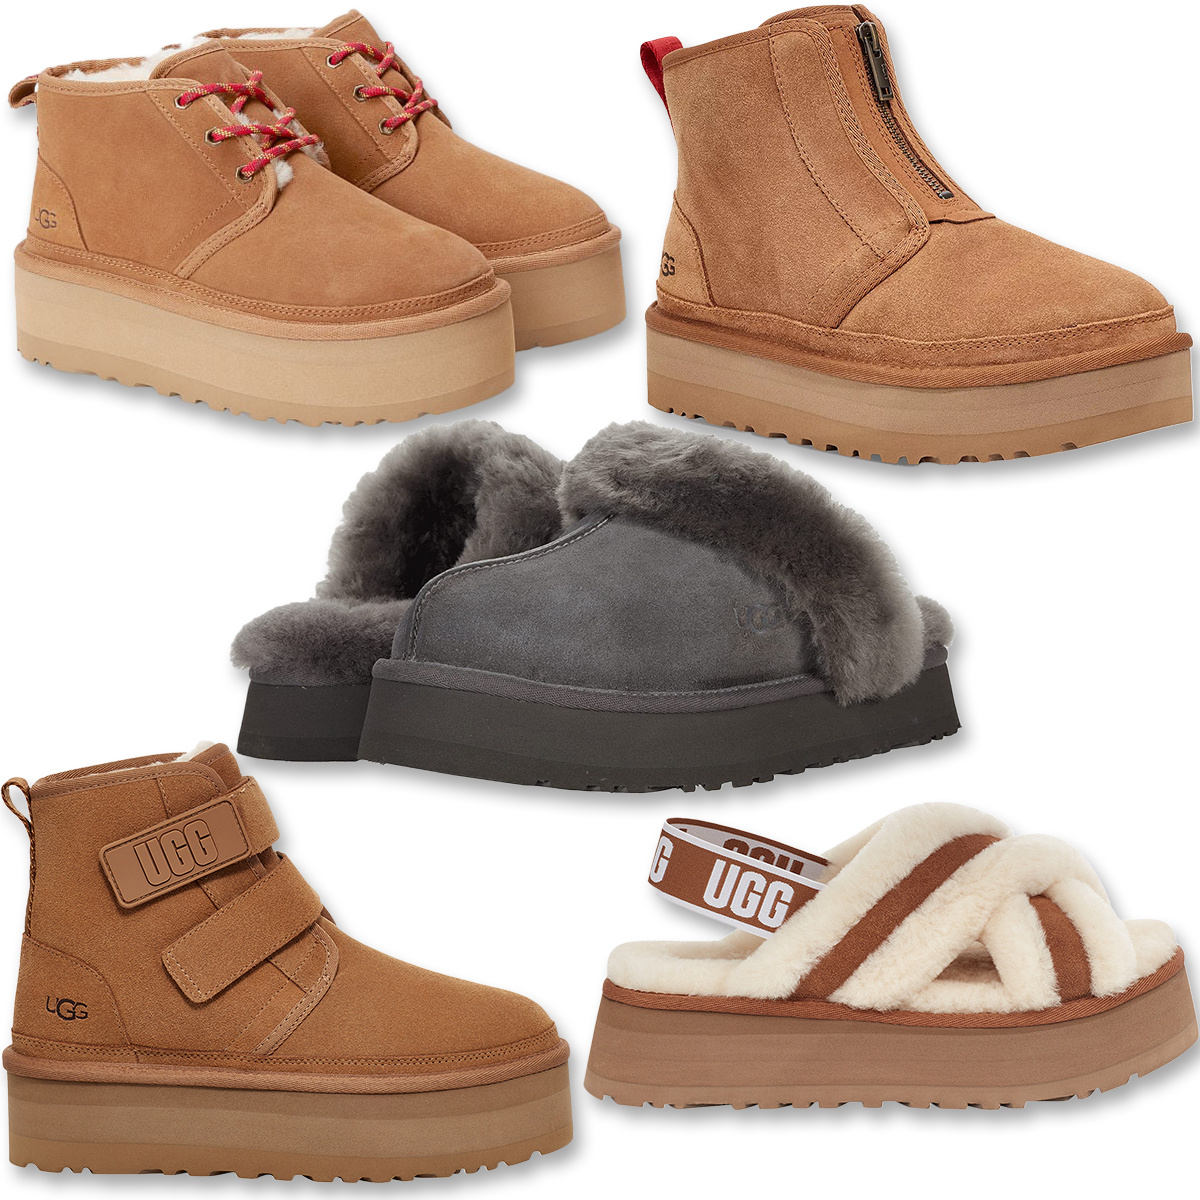 I Found All the Platform UGGs in Stock So You Don’t Have To